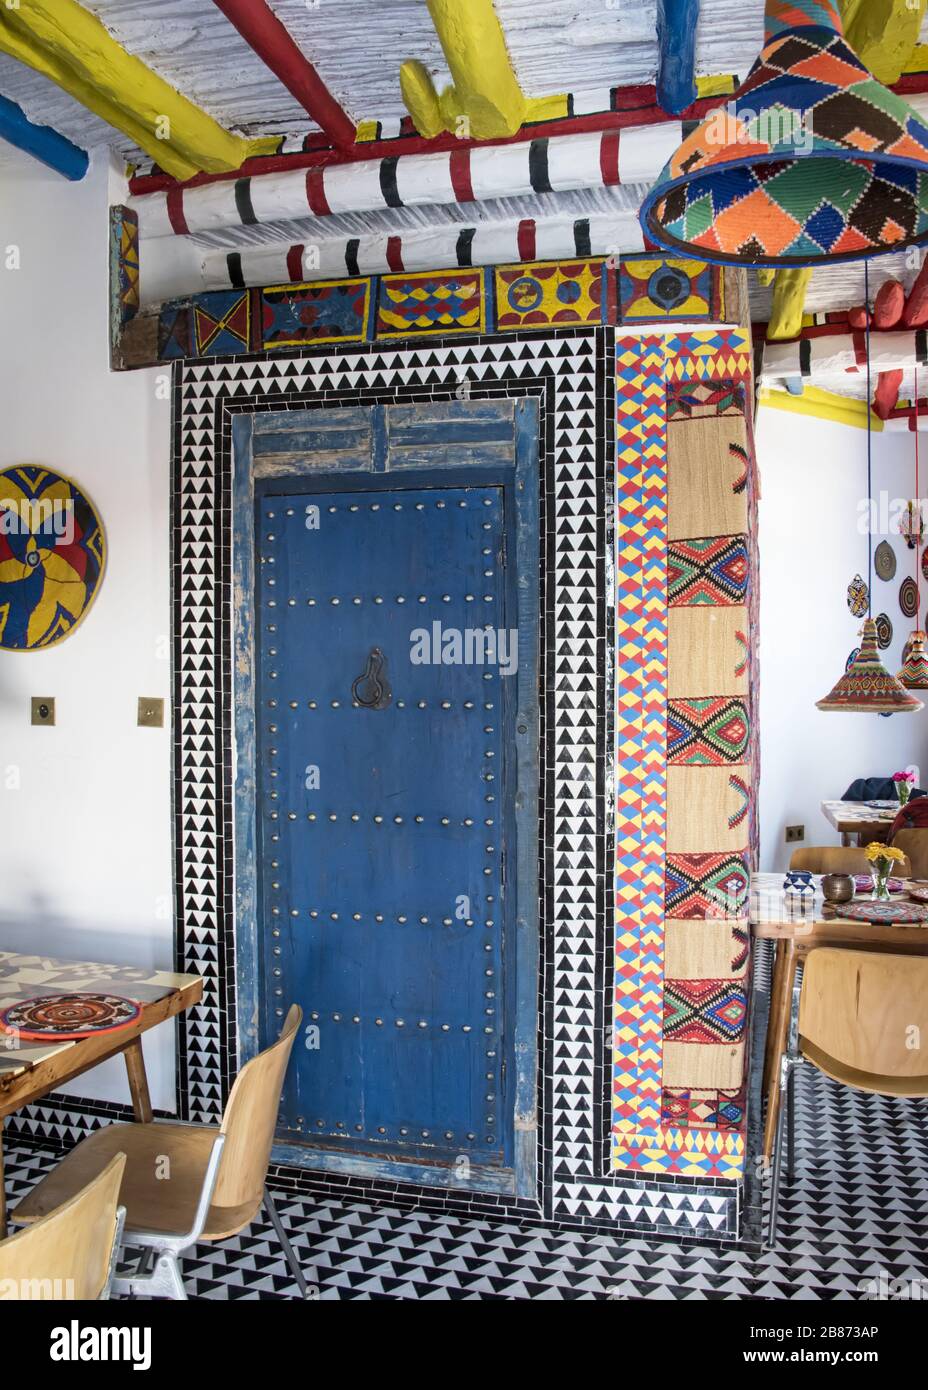 Essaouria, Morocco - September 2017: Brioghtly coloured morocan styled boutique bistro Stock Photo